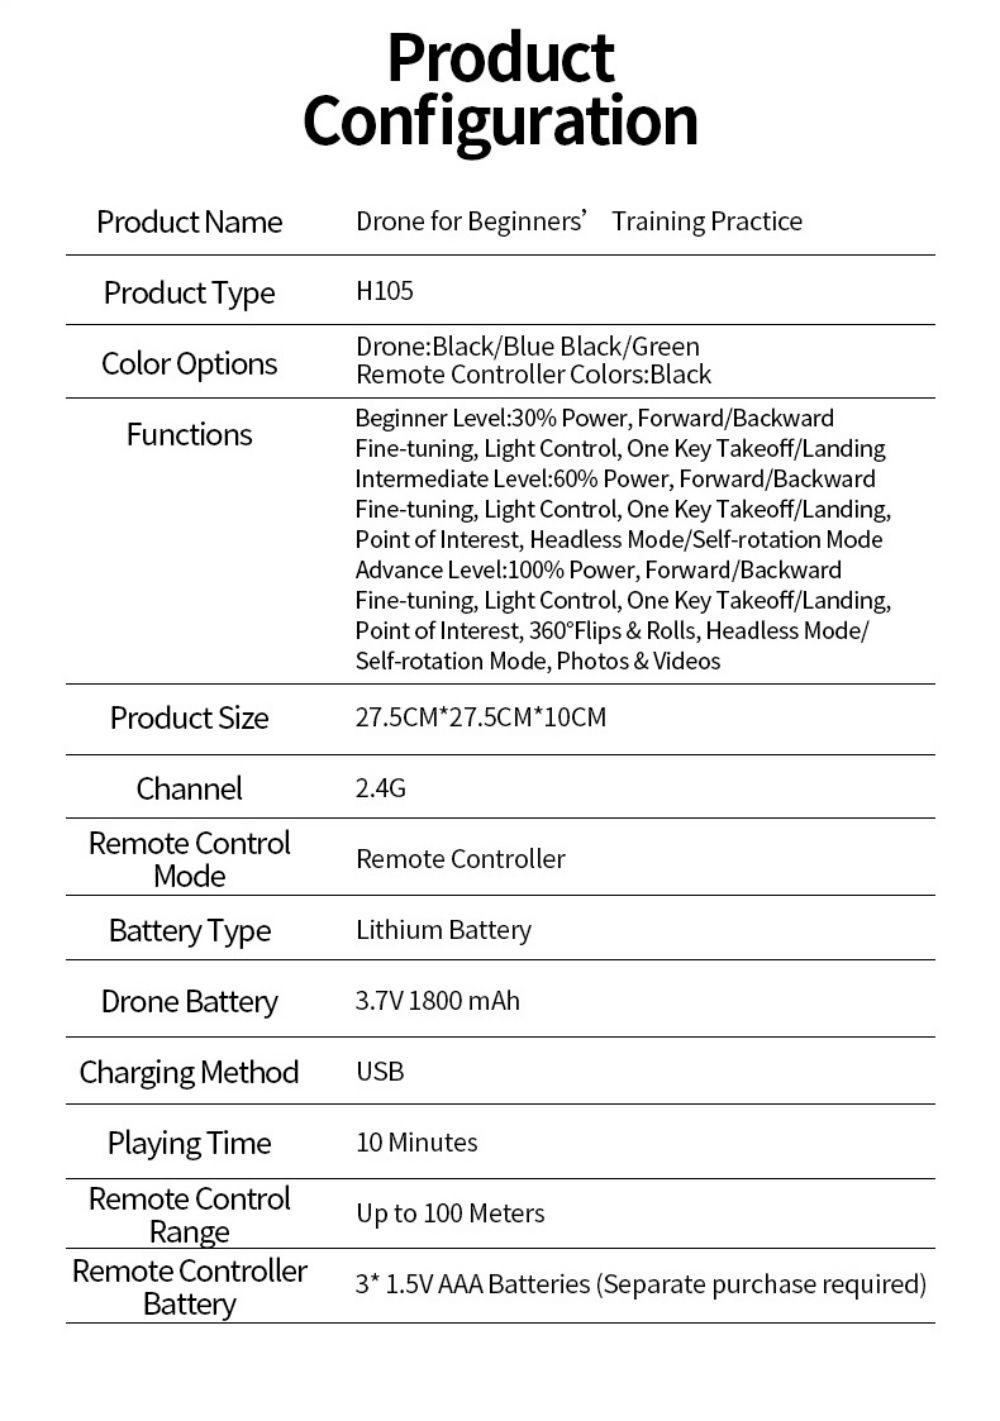 JJRC H105 2.4G RC Drone with Camera Airborne Gyro Rotation Quadcopter RTF 3 Advanced Training Mode for Beginner  - Blue 2 Batteries